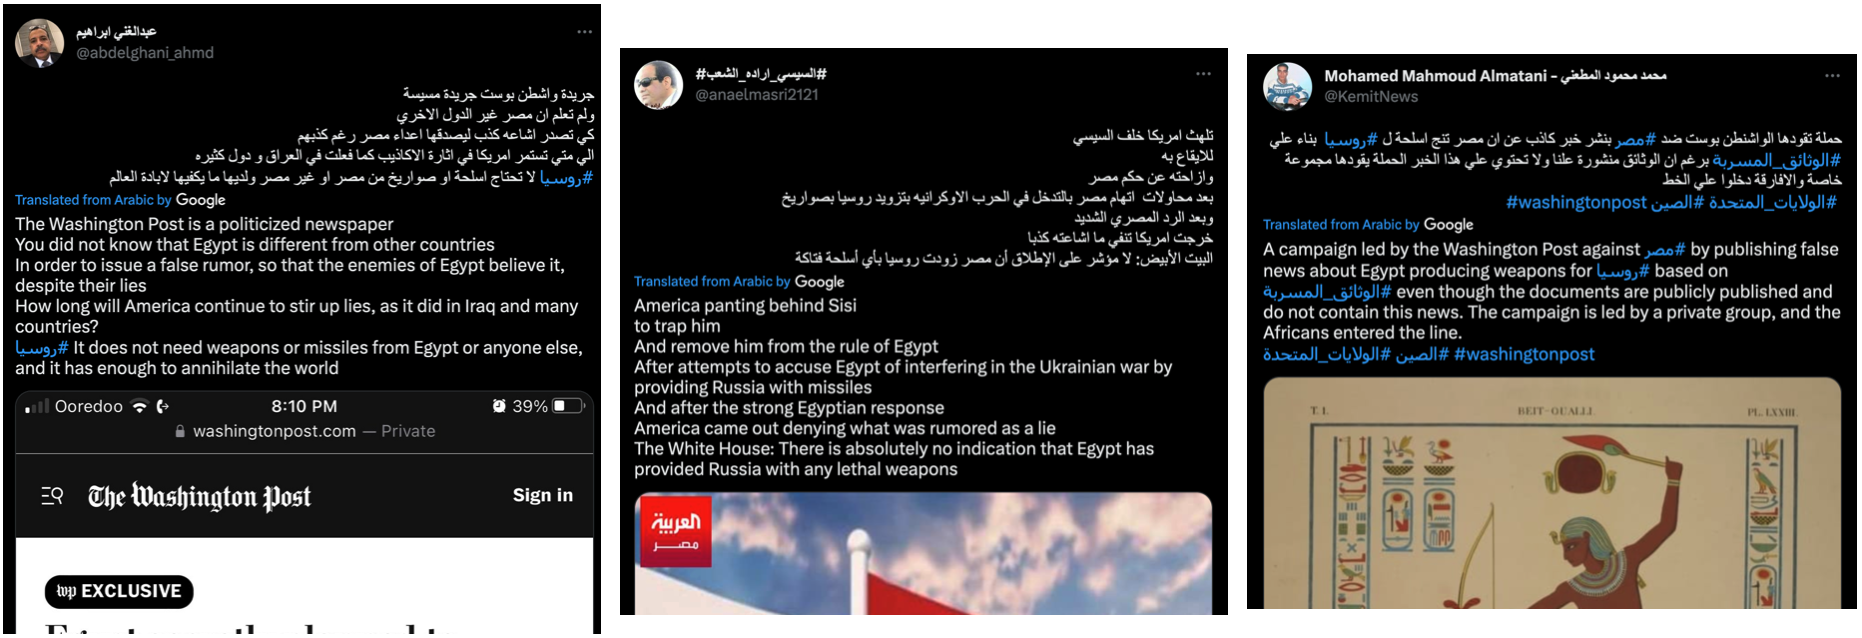 Screencaps of tweets from social media users reacting to the news of the alleged weapons deal between Egypt and Russia.